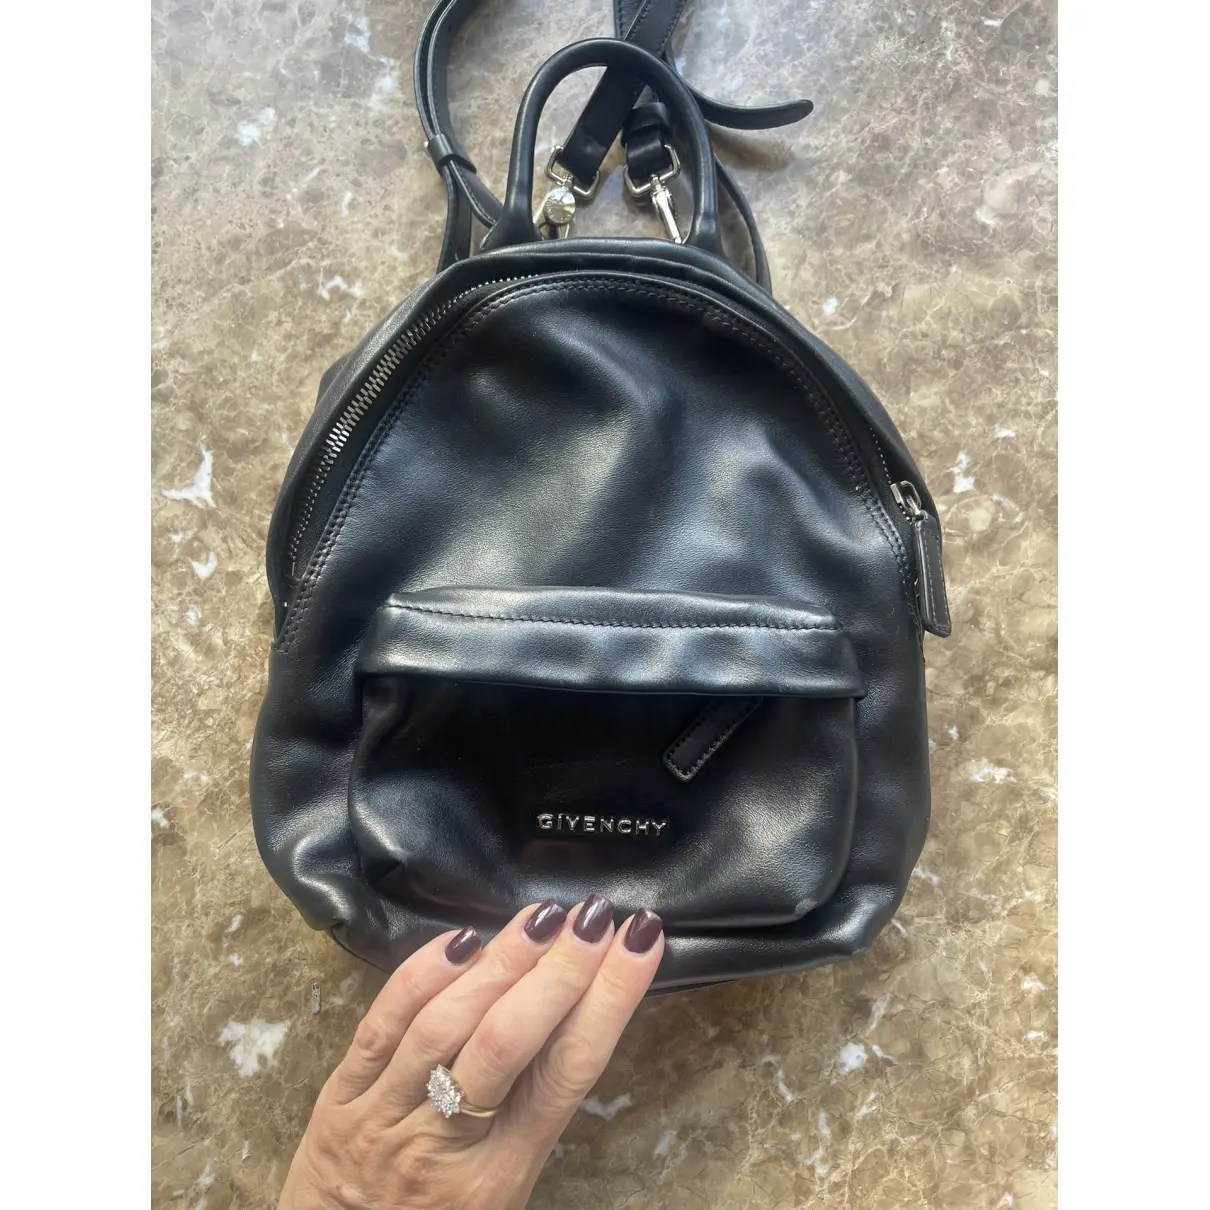 Buy Givenchy Leather backpack online